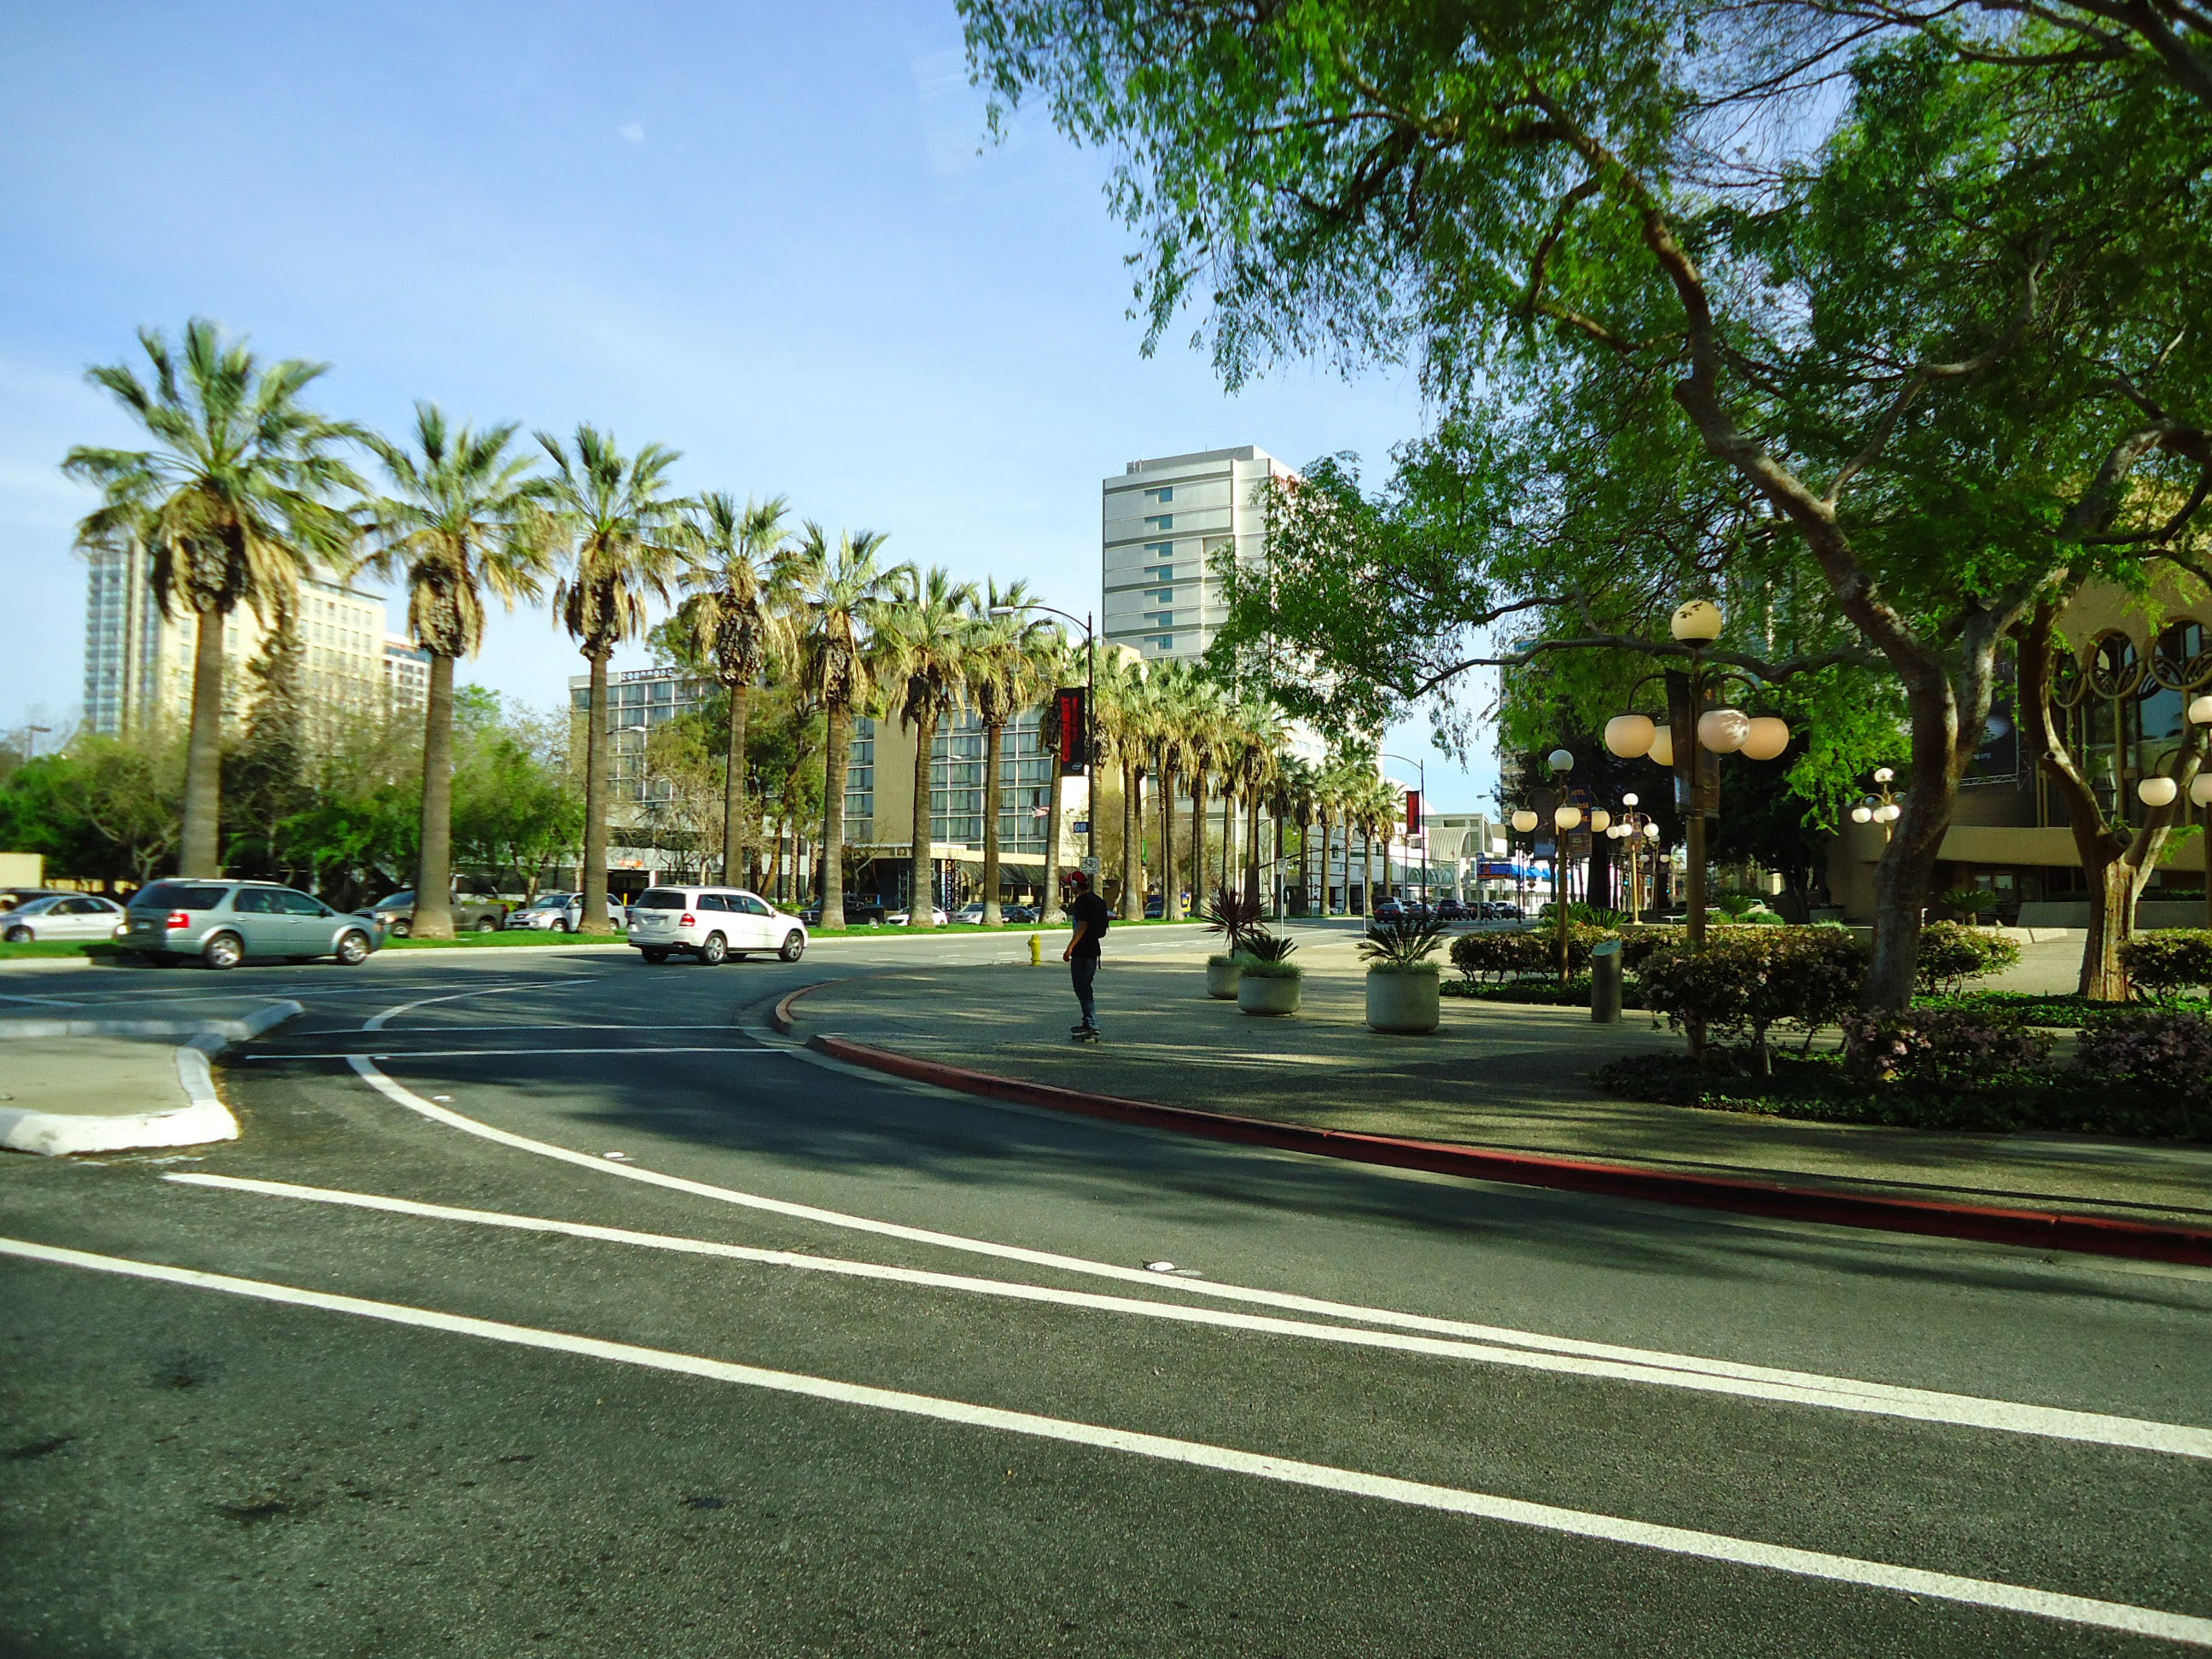 Downtown San Jose with trees and street in San Jose, California image - Free stock photo ...